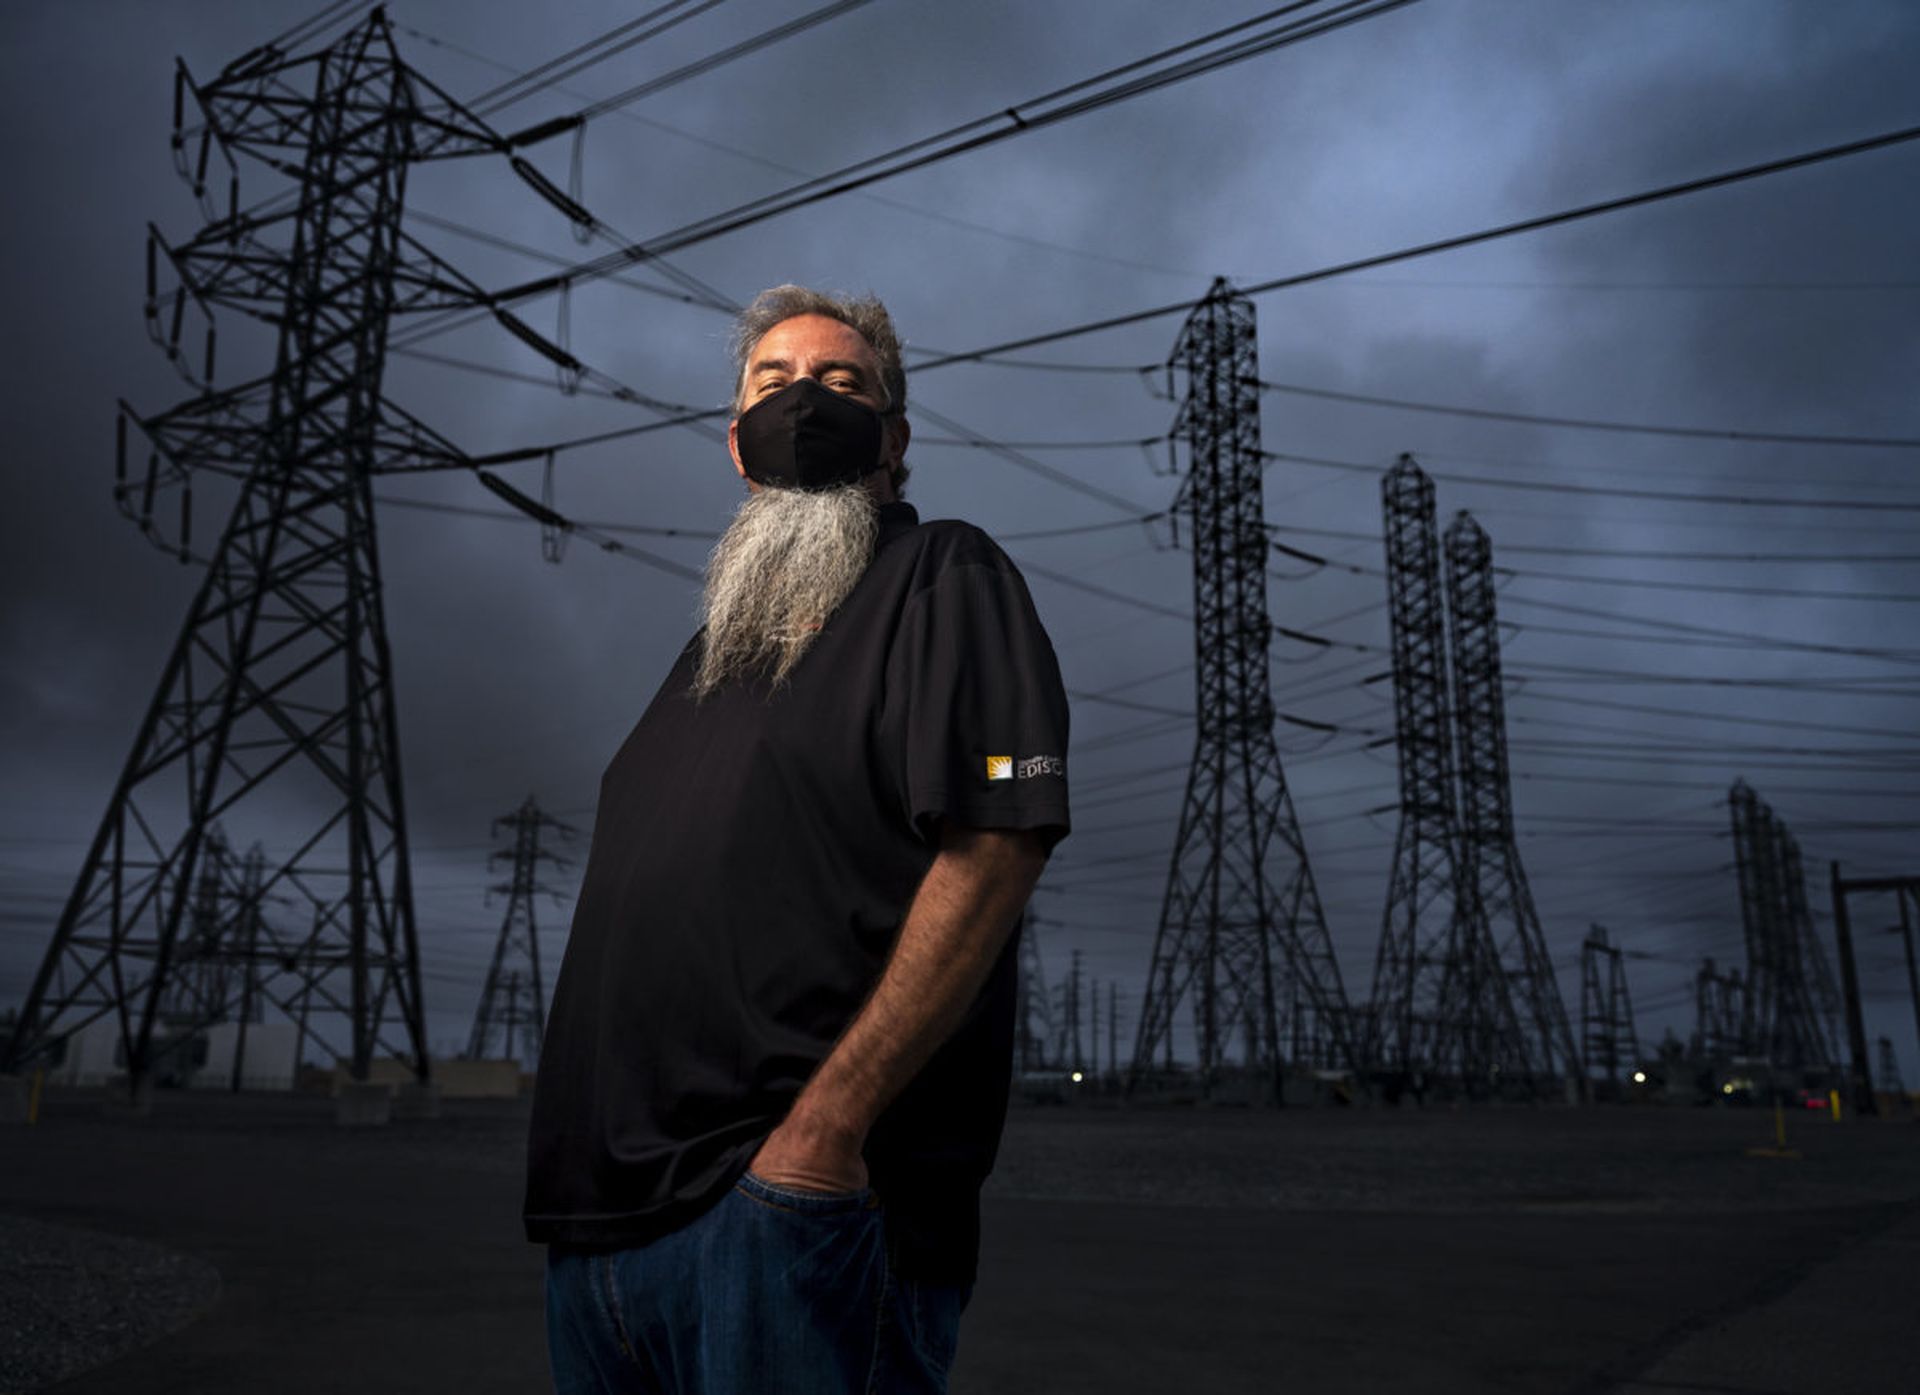 Eric Hetrick, 52, substation operations supervisor at Mira Loma grid management center, poses for a photograph on June 5, 2020 in Ontario, California as employees work to keep operations up during the COVID-19 pandemic. The Federal Energy Regulatory Commission is looking to revamp cybersecurity regulations for bulk electric systems while its CIO ad...